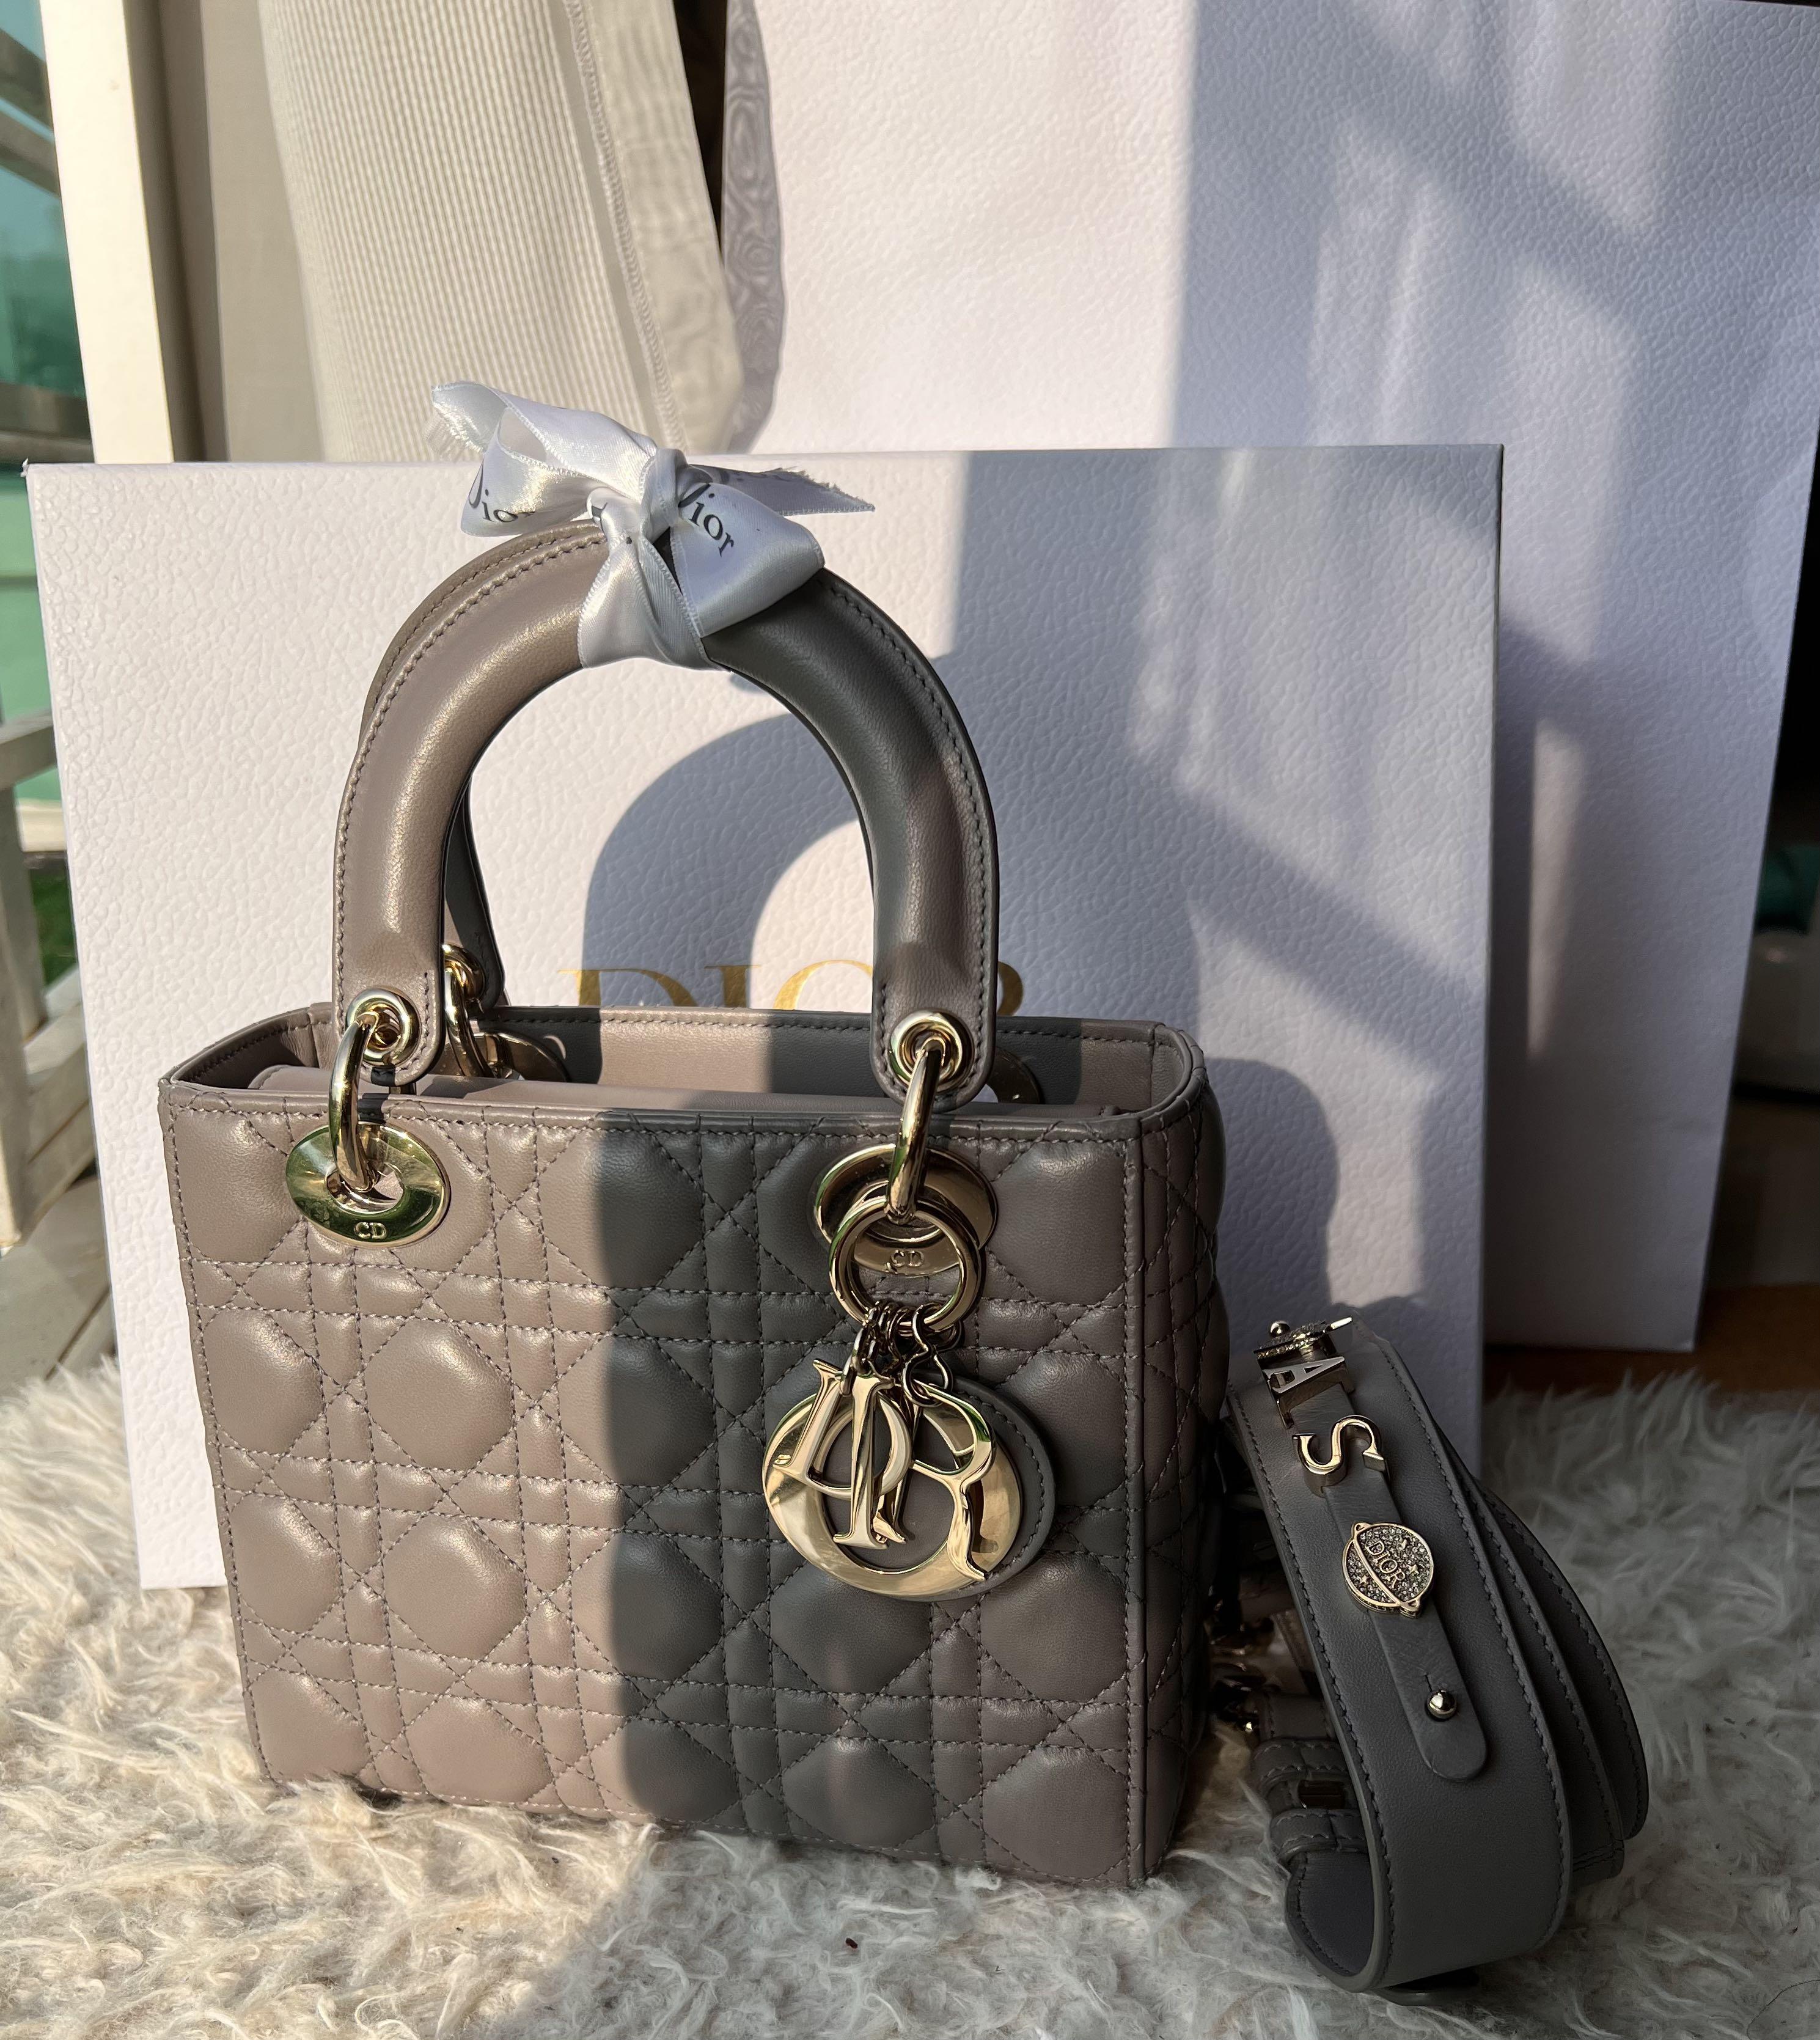 Christian Dior Small Lady Dior My ABC Bag Gray Lambskin Complete Package   eBay